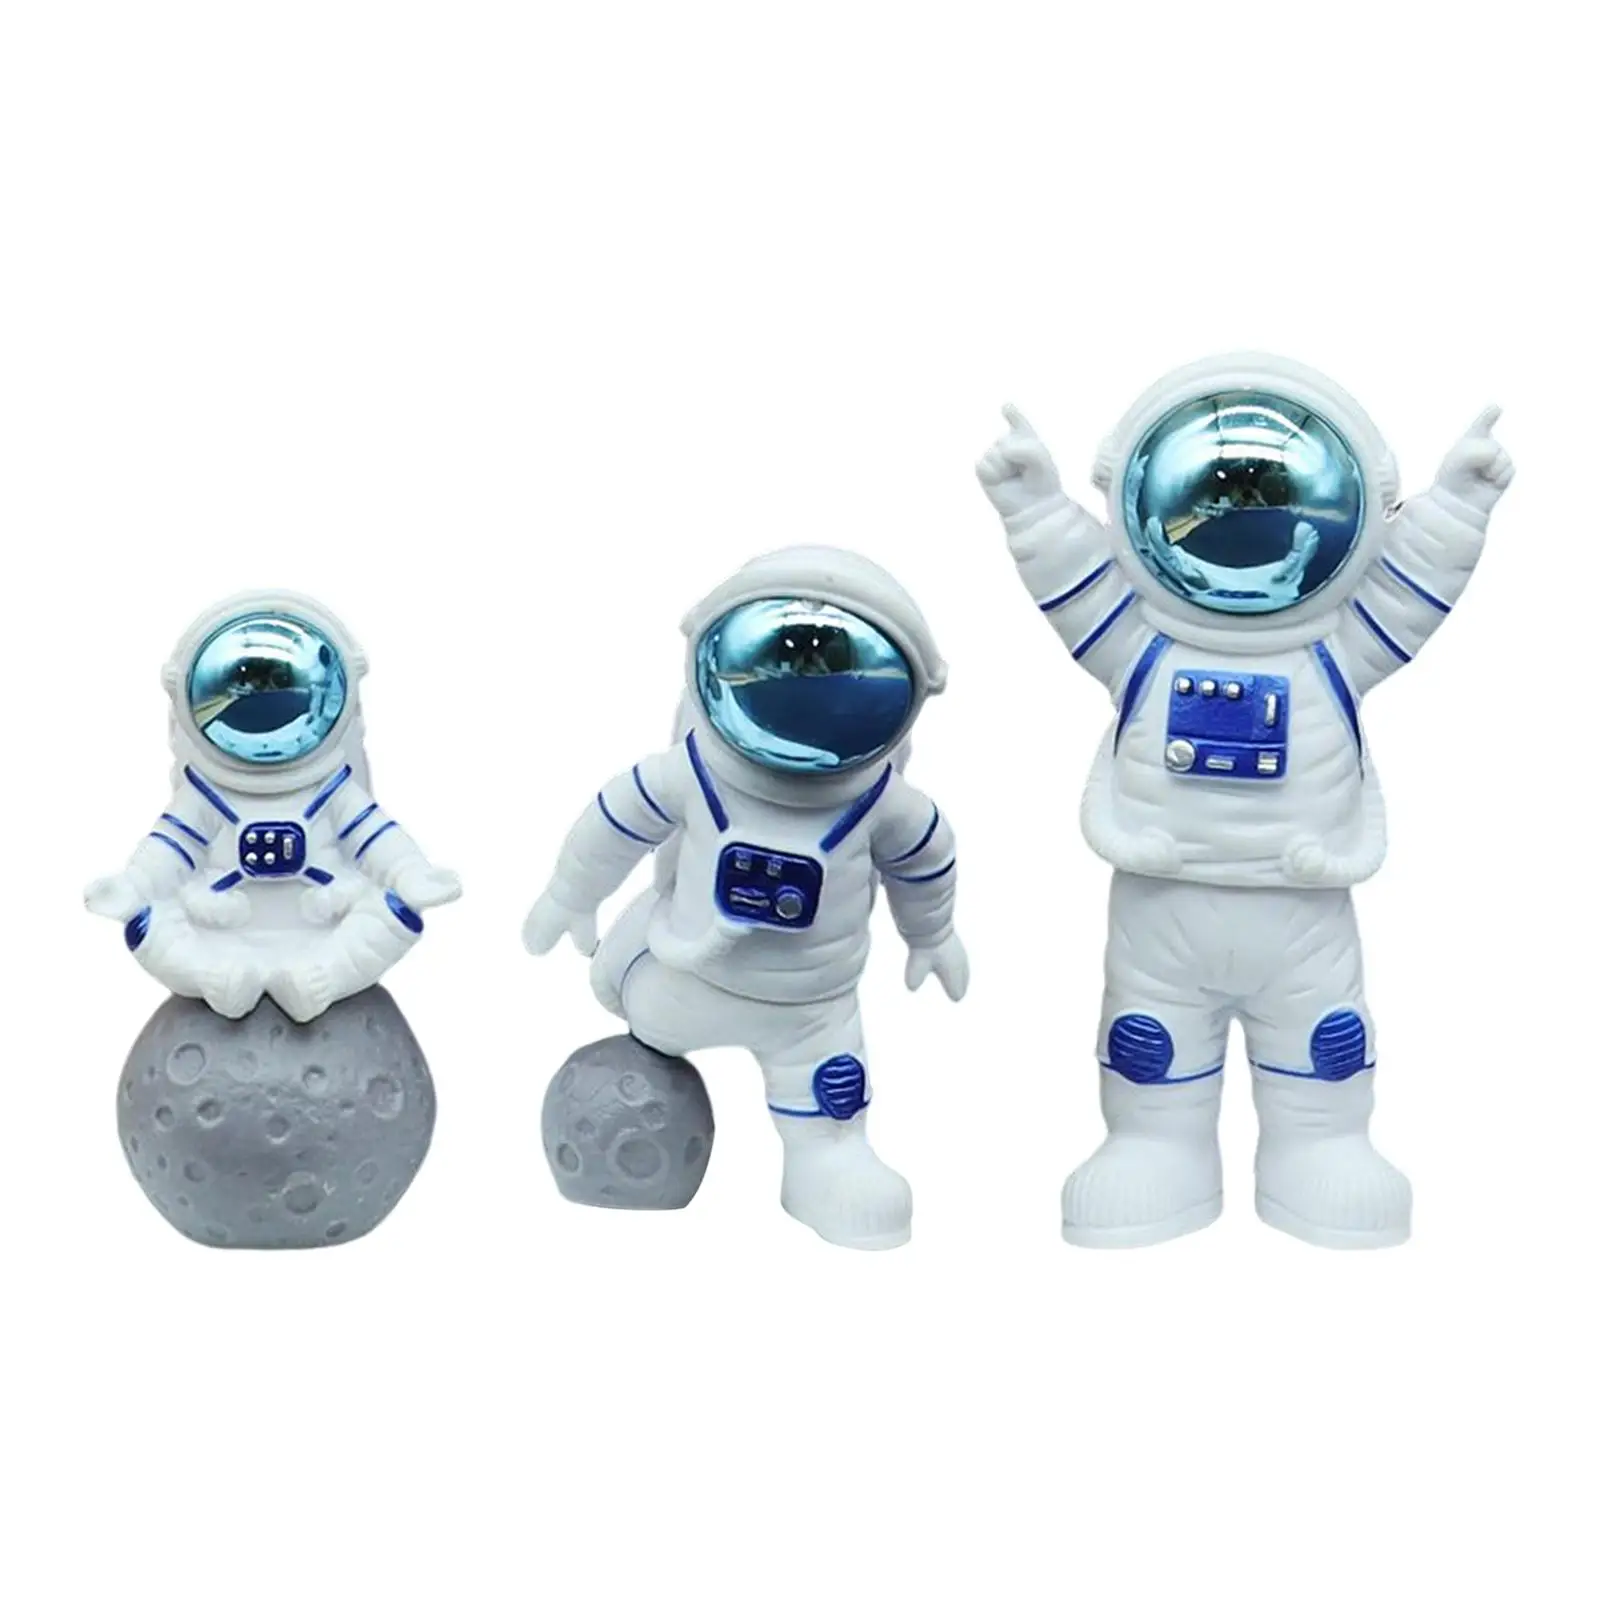 3Pcs Astronaut Statues spaceman Toys Spaceman Ornaments Astronaut Cake Toppers for Bookshelves Car Dashboard decor Crafts